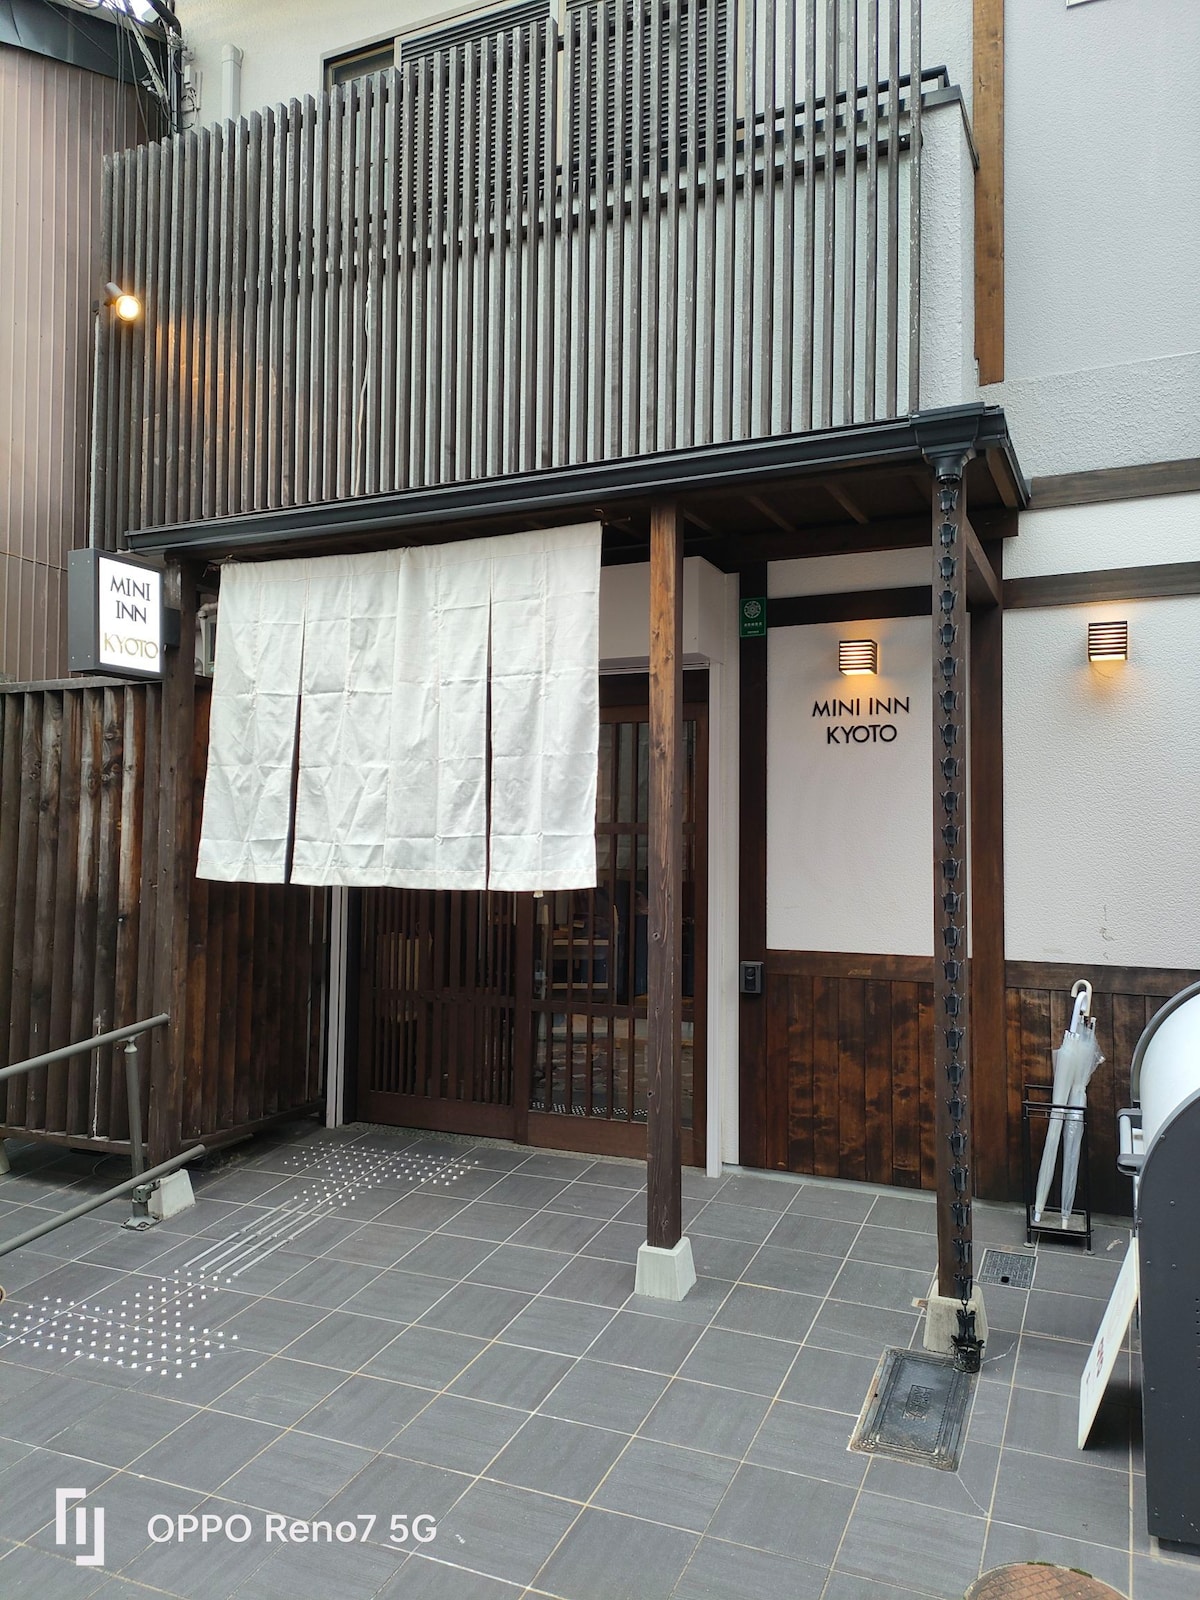 Mini Inn Kyoto 2(Chinese only)